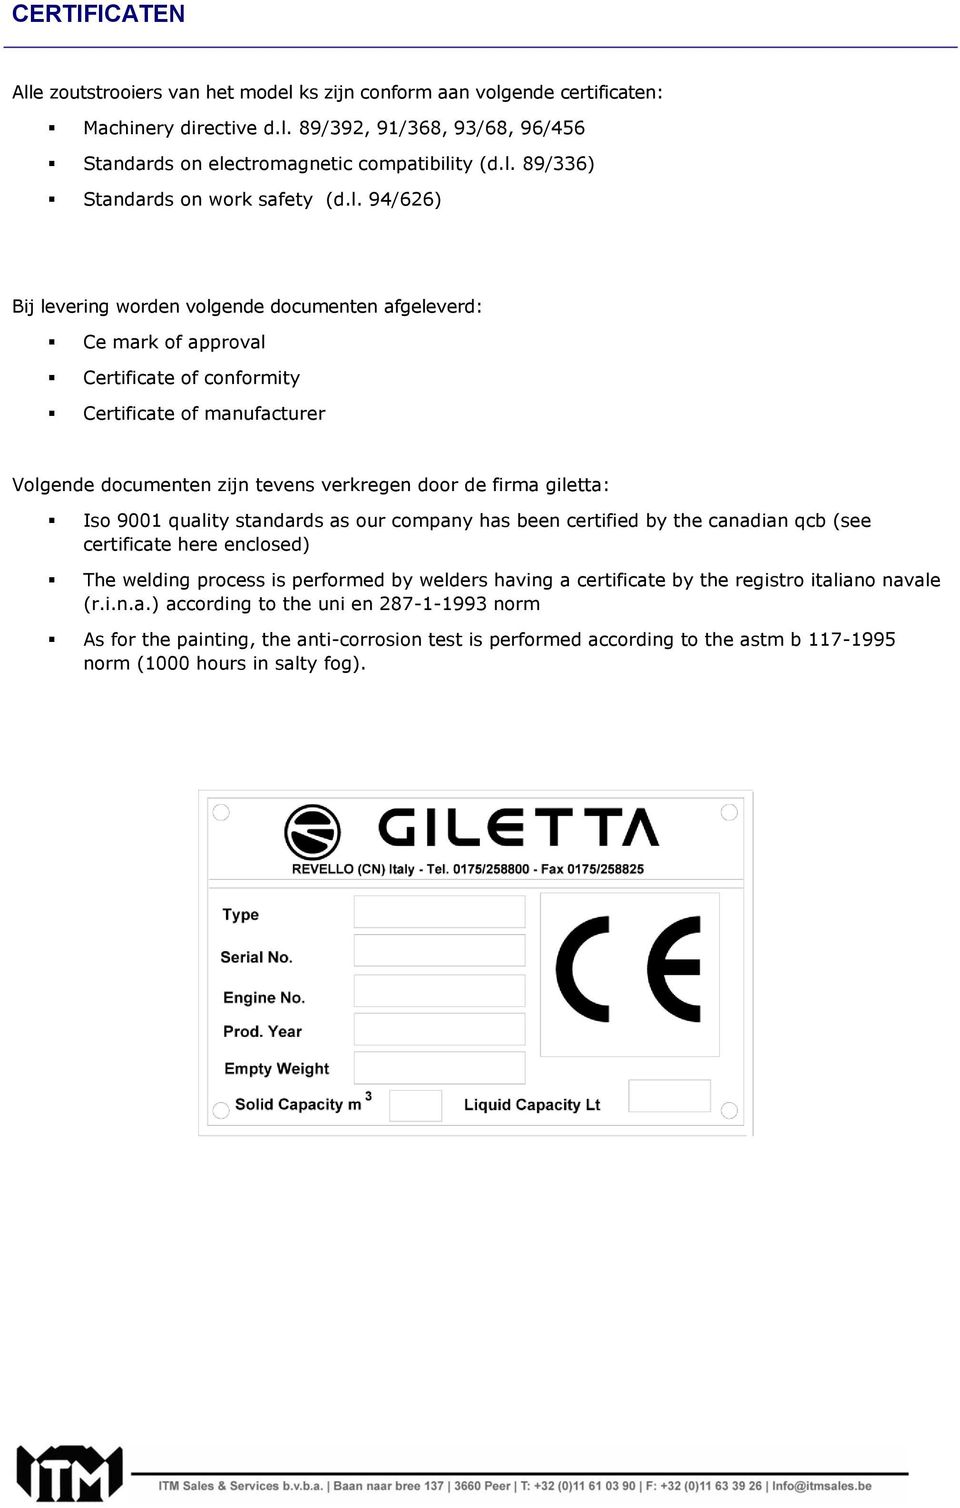 giletta: Iso 9001 quality standards as our company has been certified by the canadian qcb (see certificate here enclosed) The welding process is performed by welders having a certificate by the